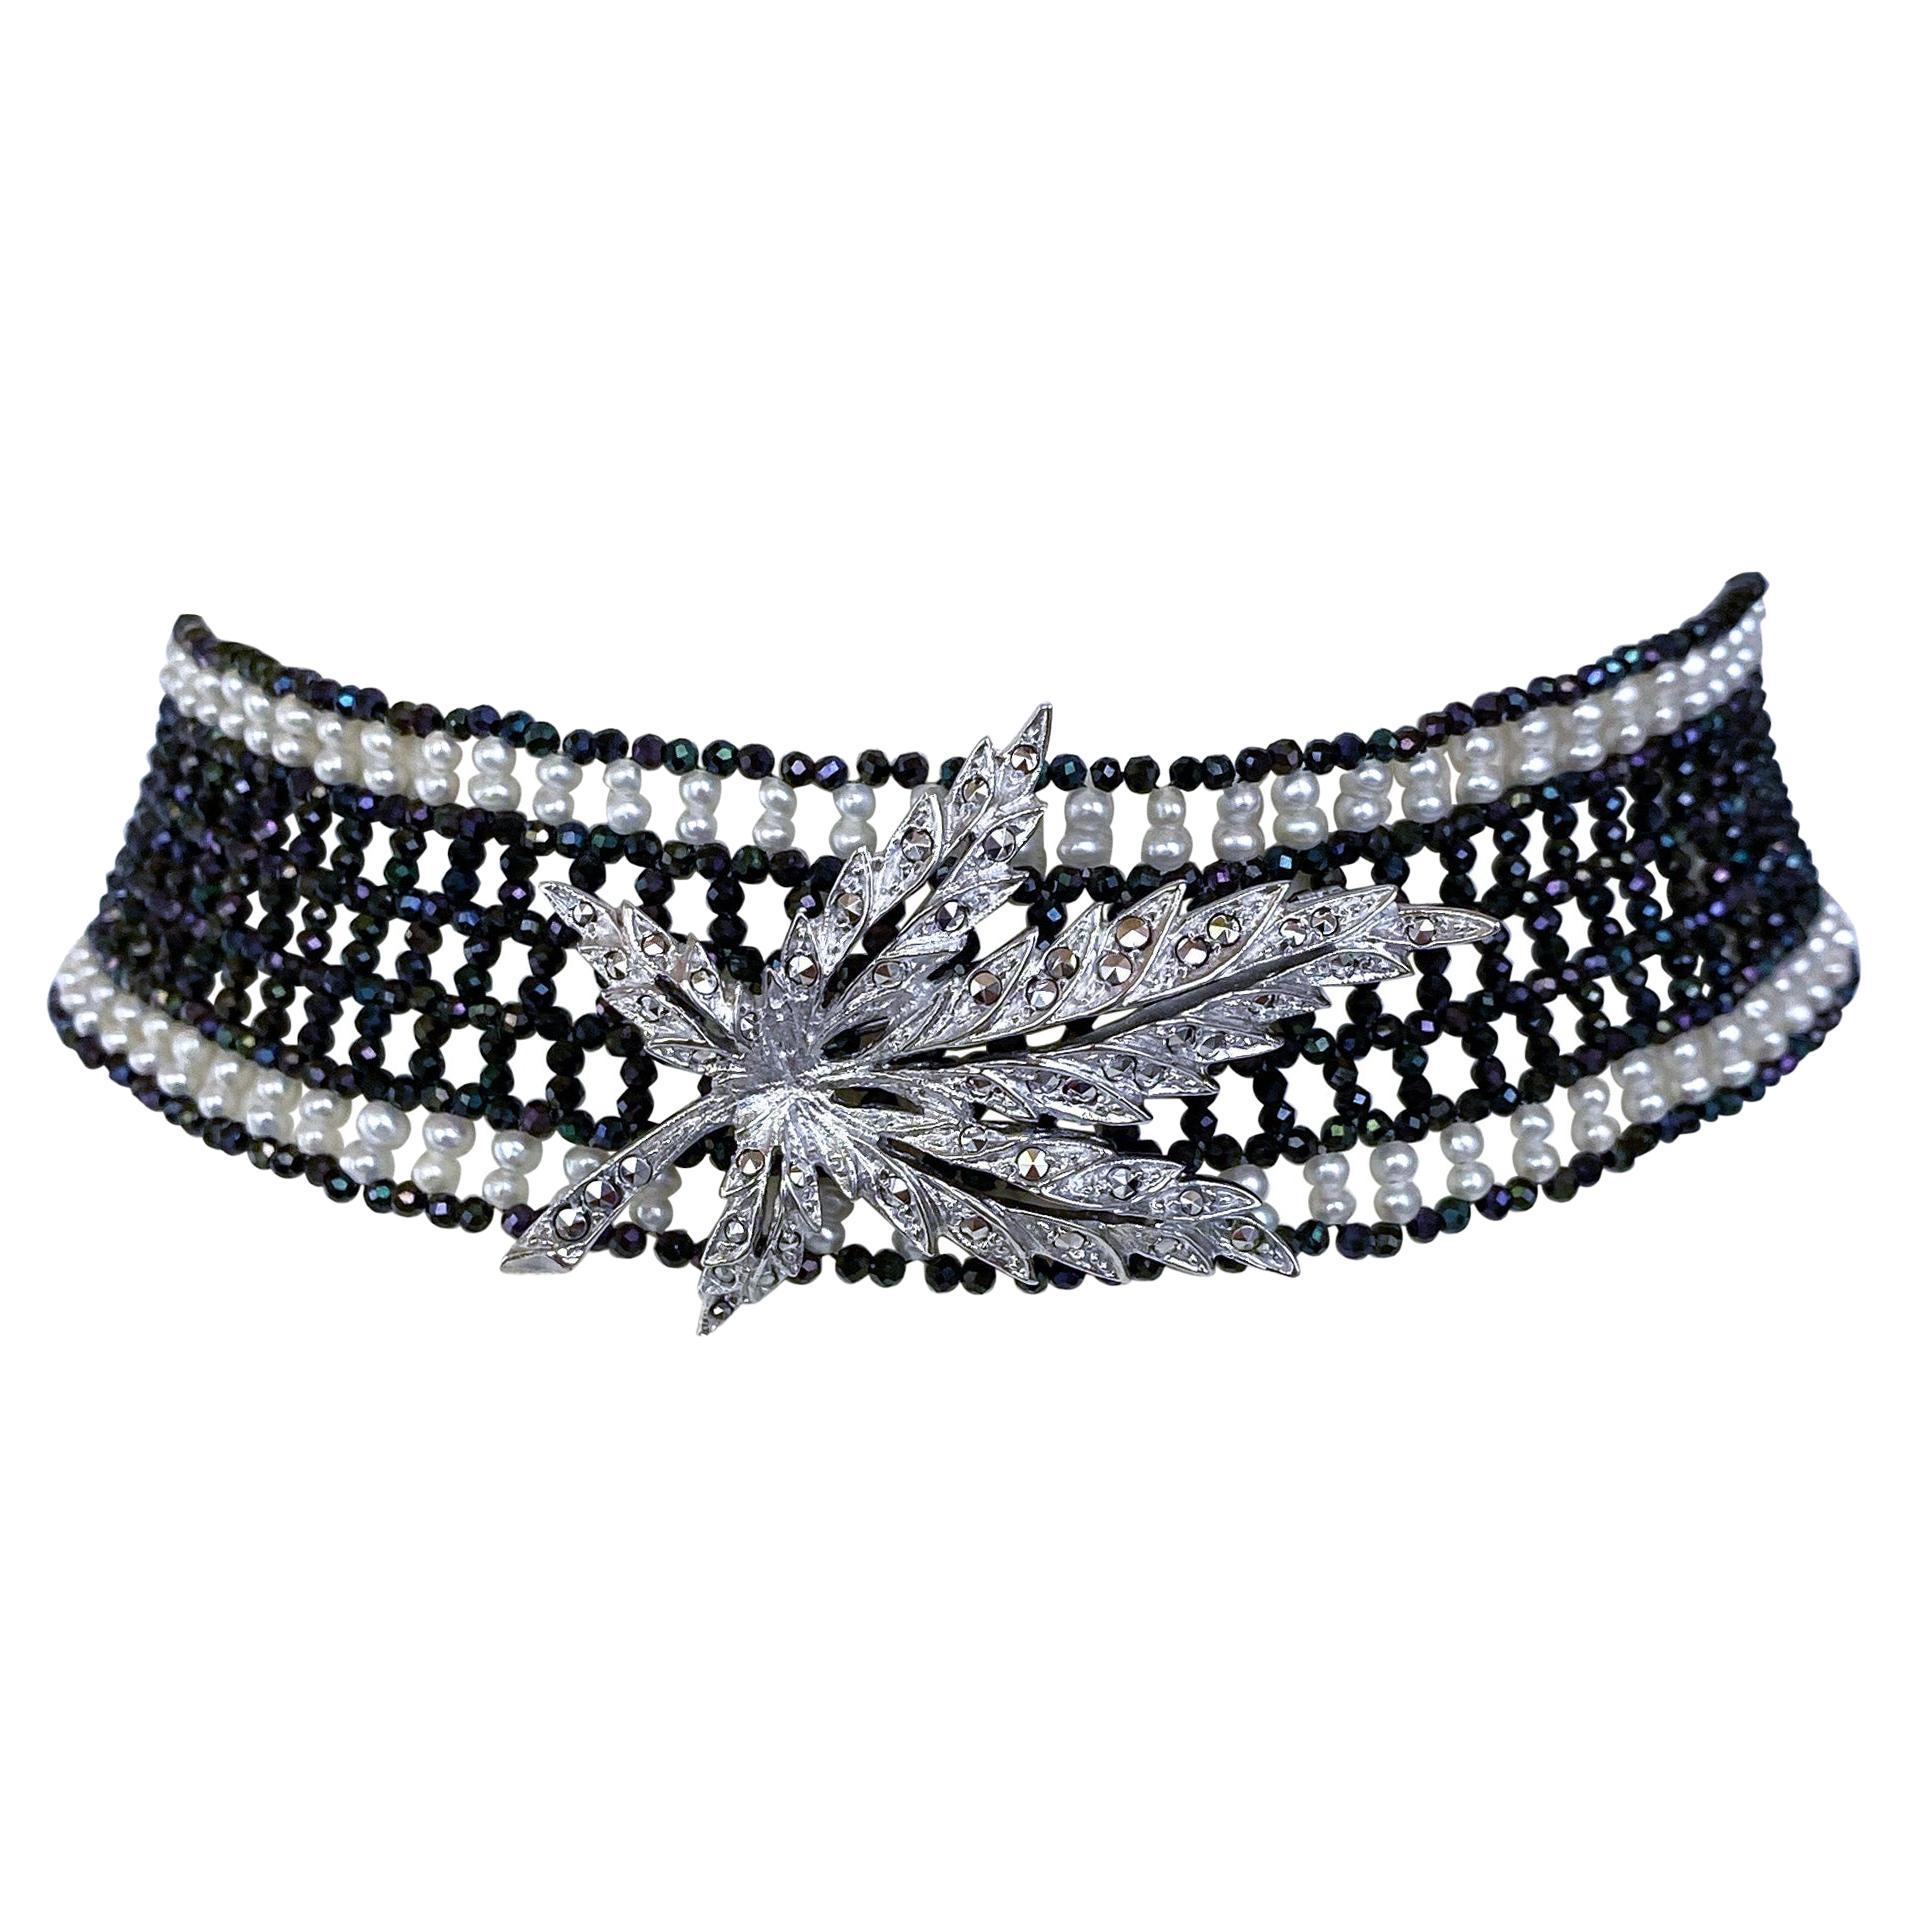 Marina J Woven Black Spinel &White Pearl Choker, Rhodium Plated Silver Pin, Clasp